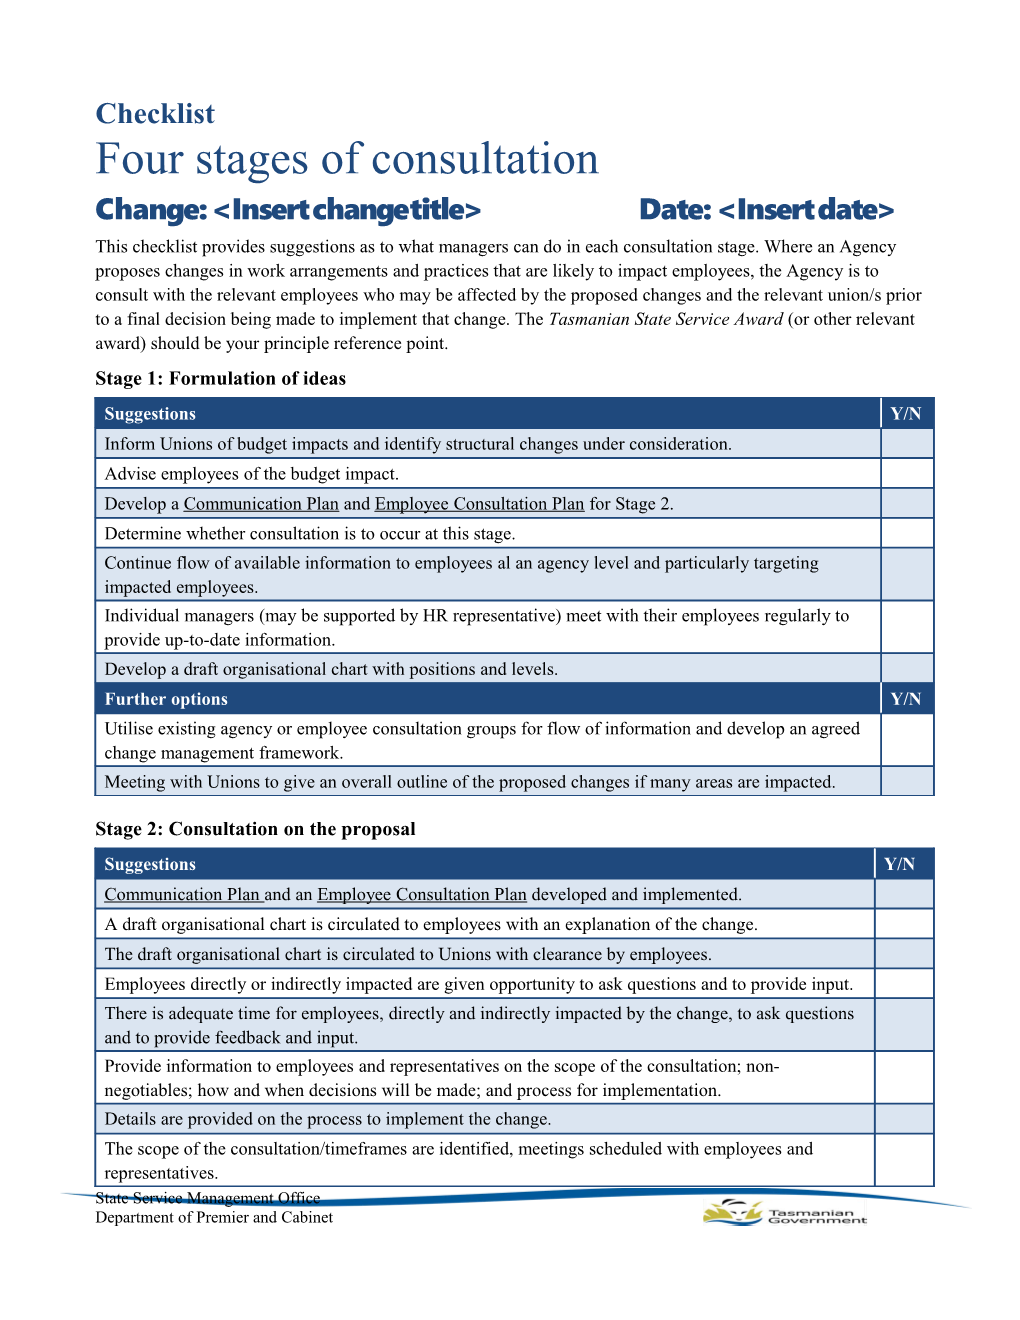 Four Stages of Consultation